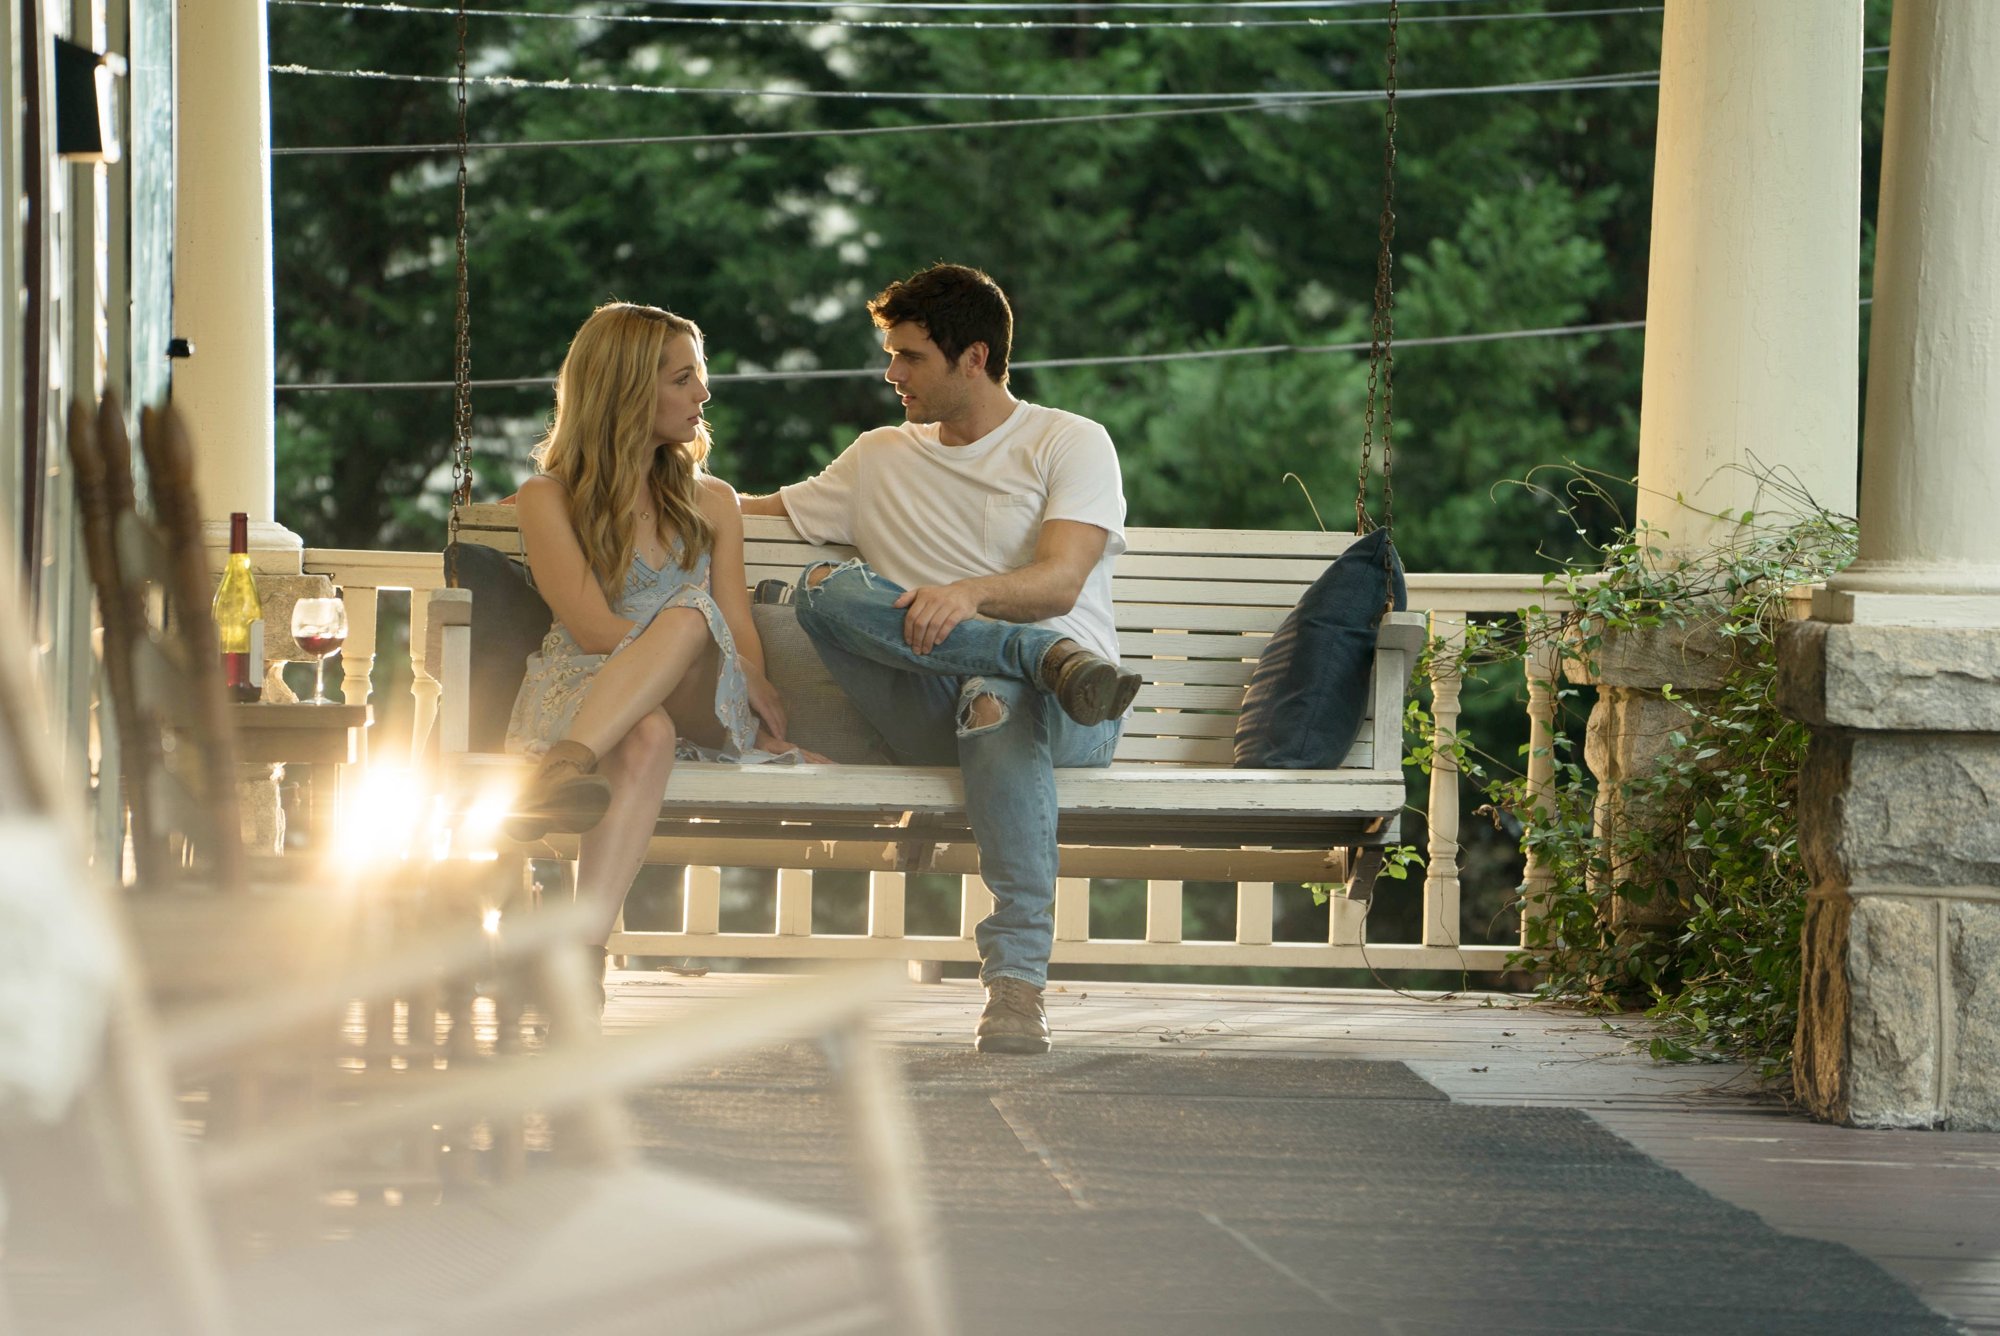 Jessica Rothe stars as Josie and Alex Roe stars as Liam Page in Roadside Attractions' Forever My Girl (2018)